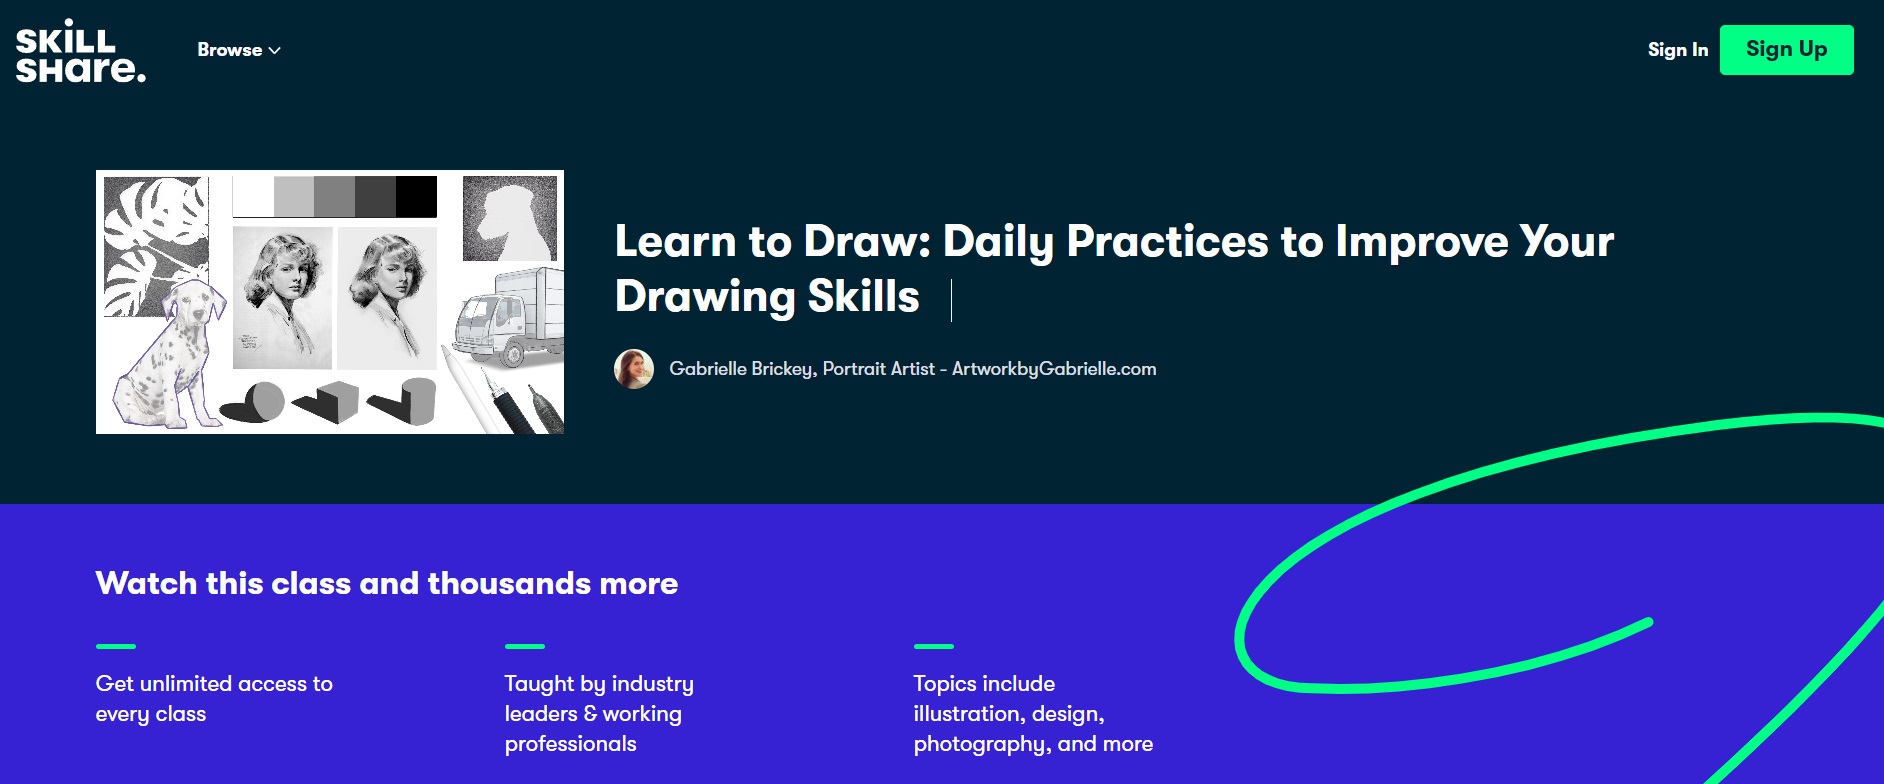  Learn To Draw: Daily Practices To Improve Your Drawing Skills 